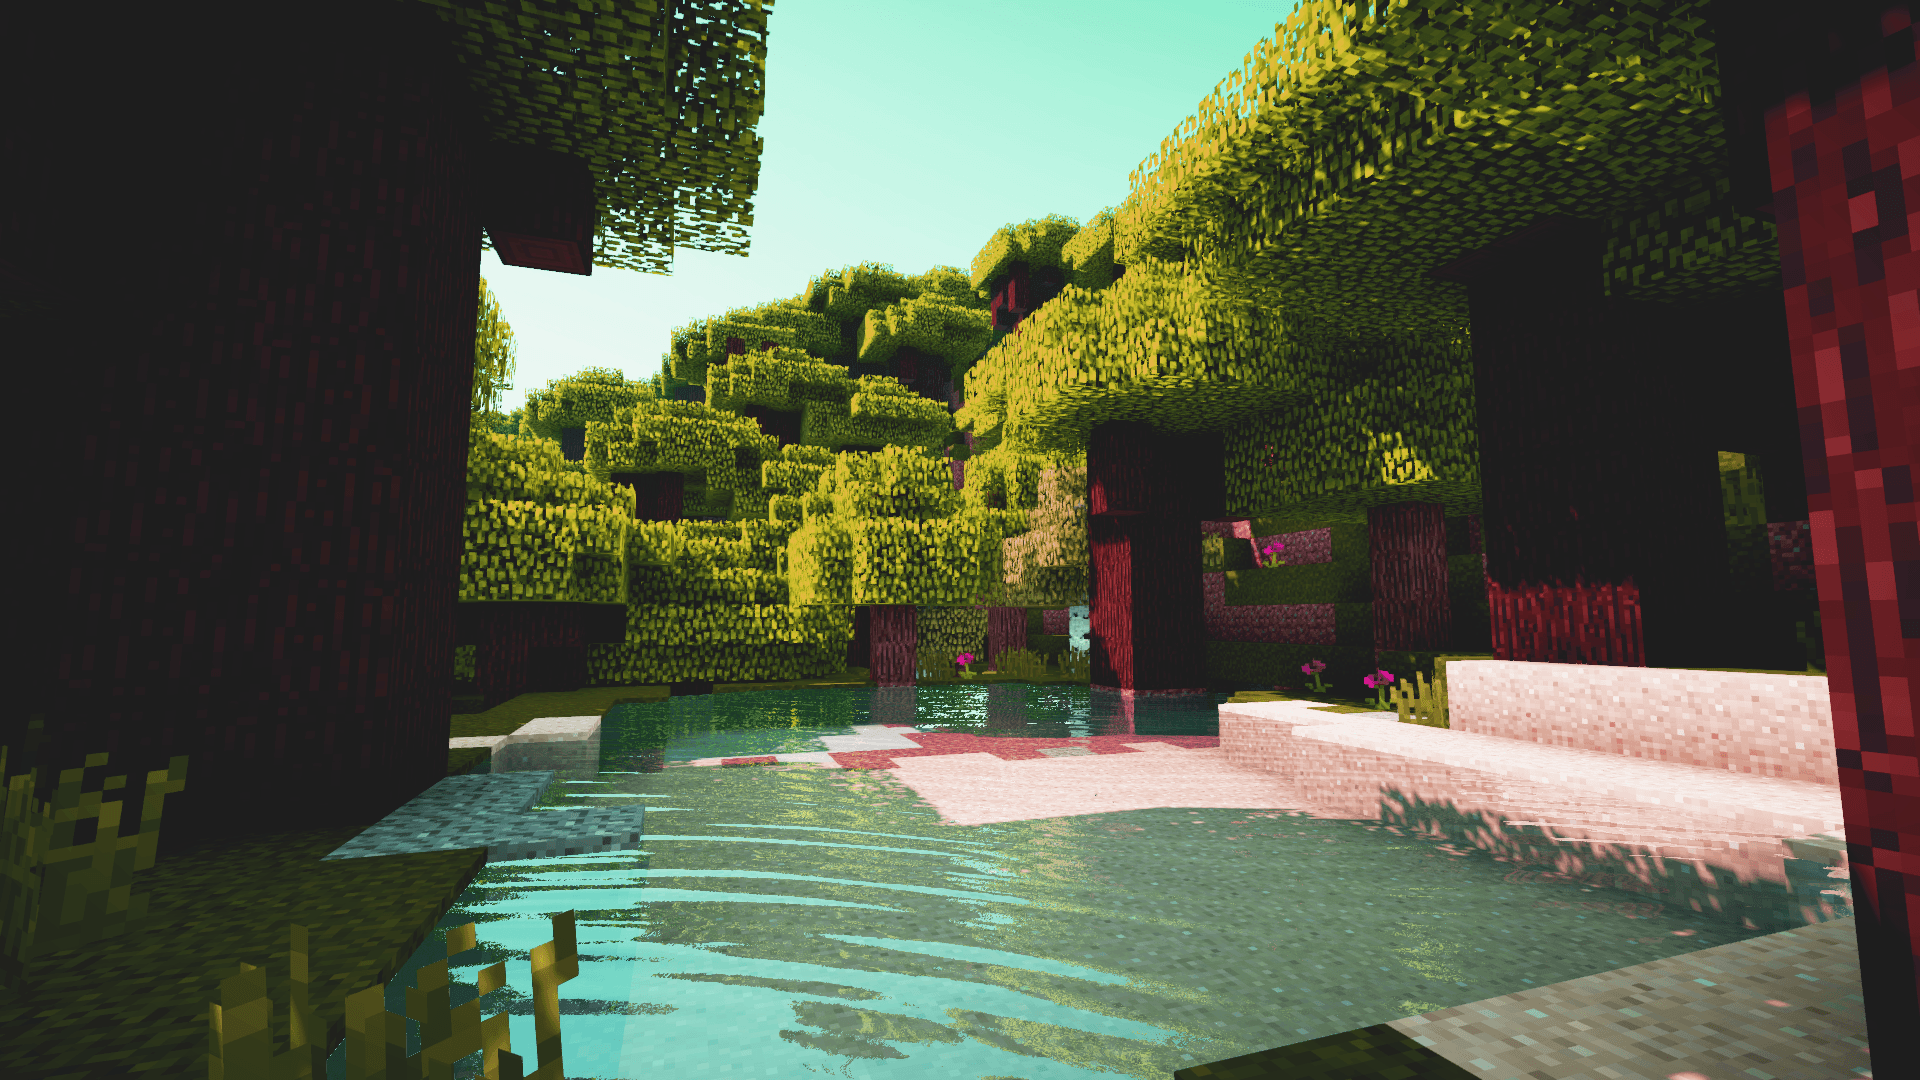 minecraft texture packs that work well with shaders